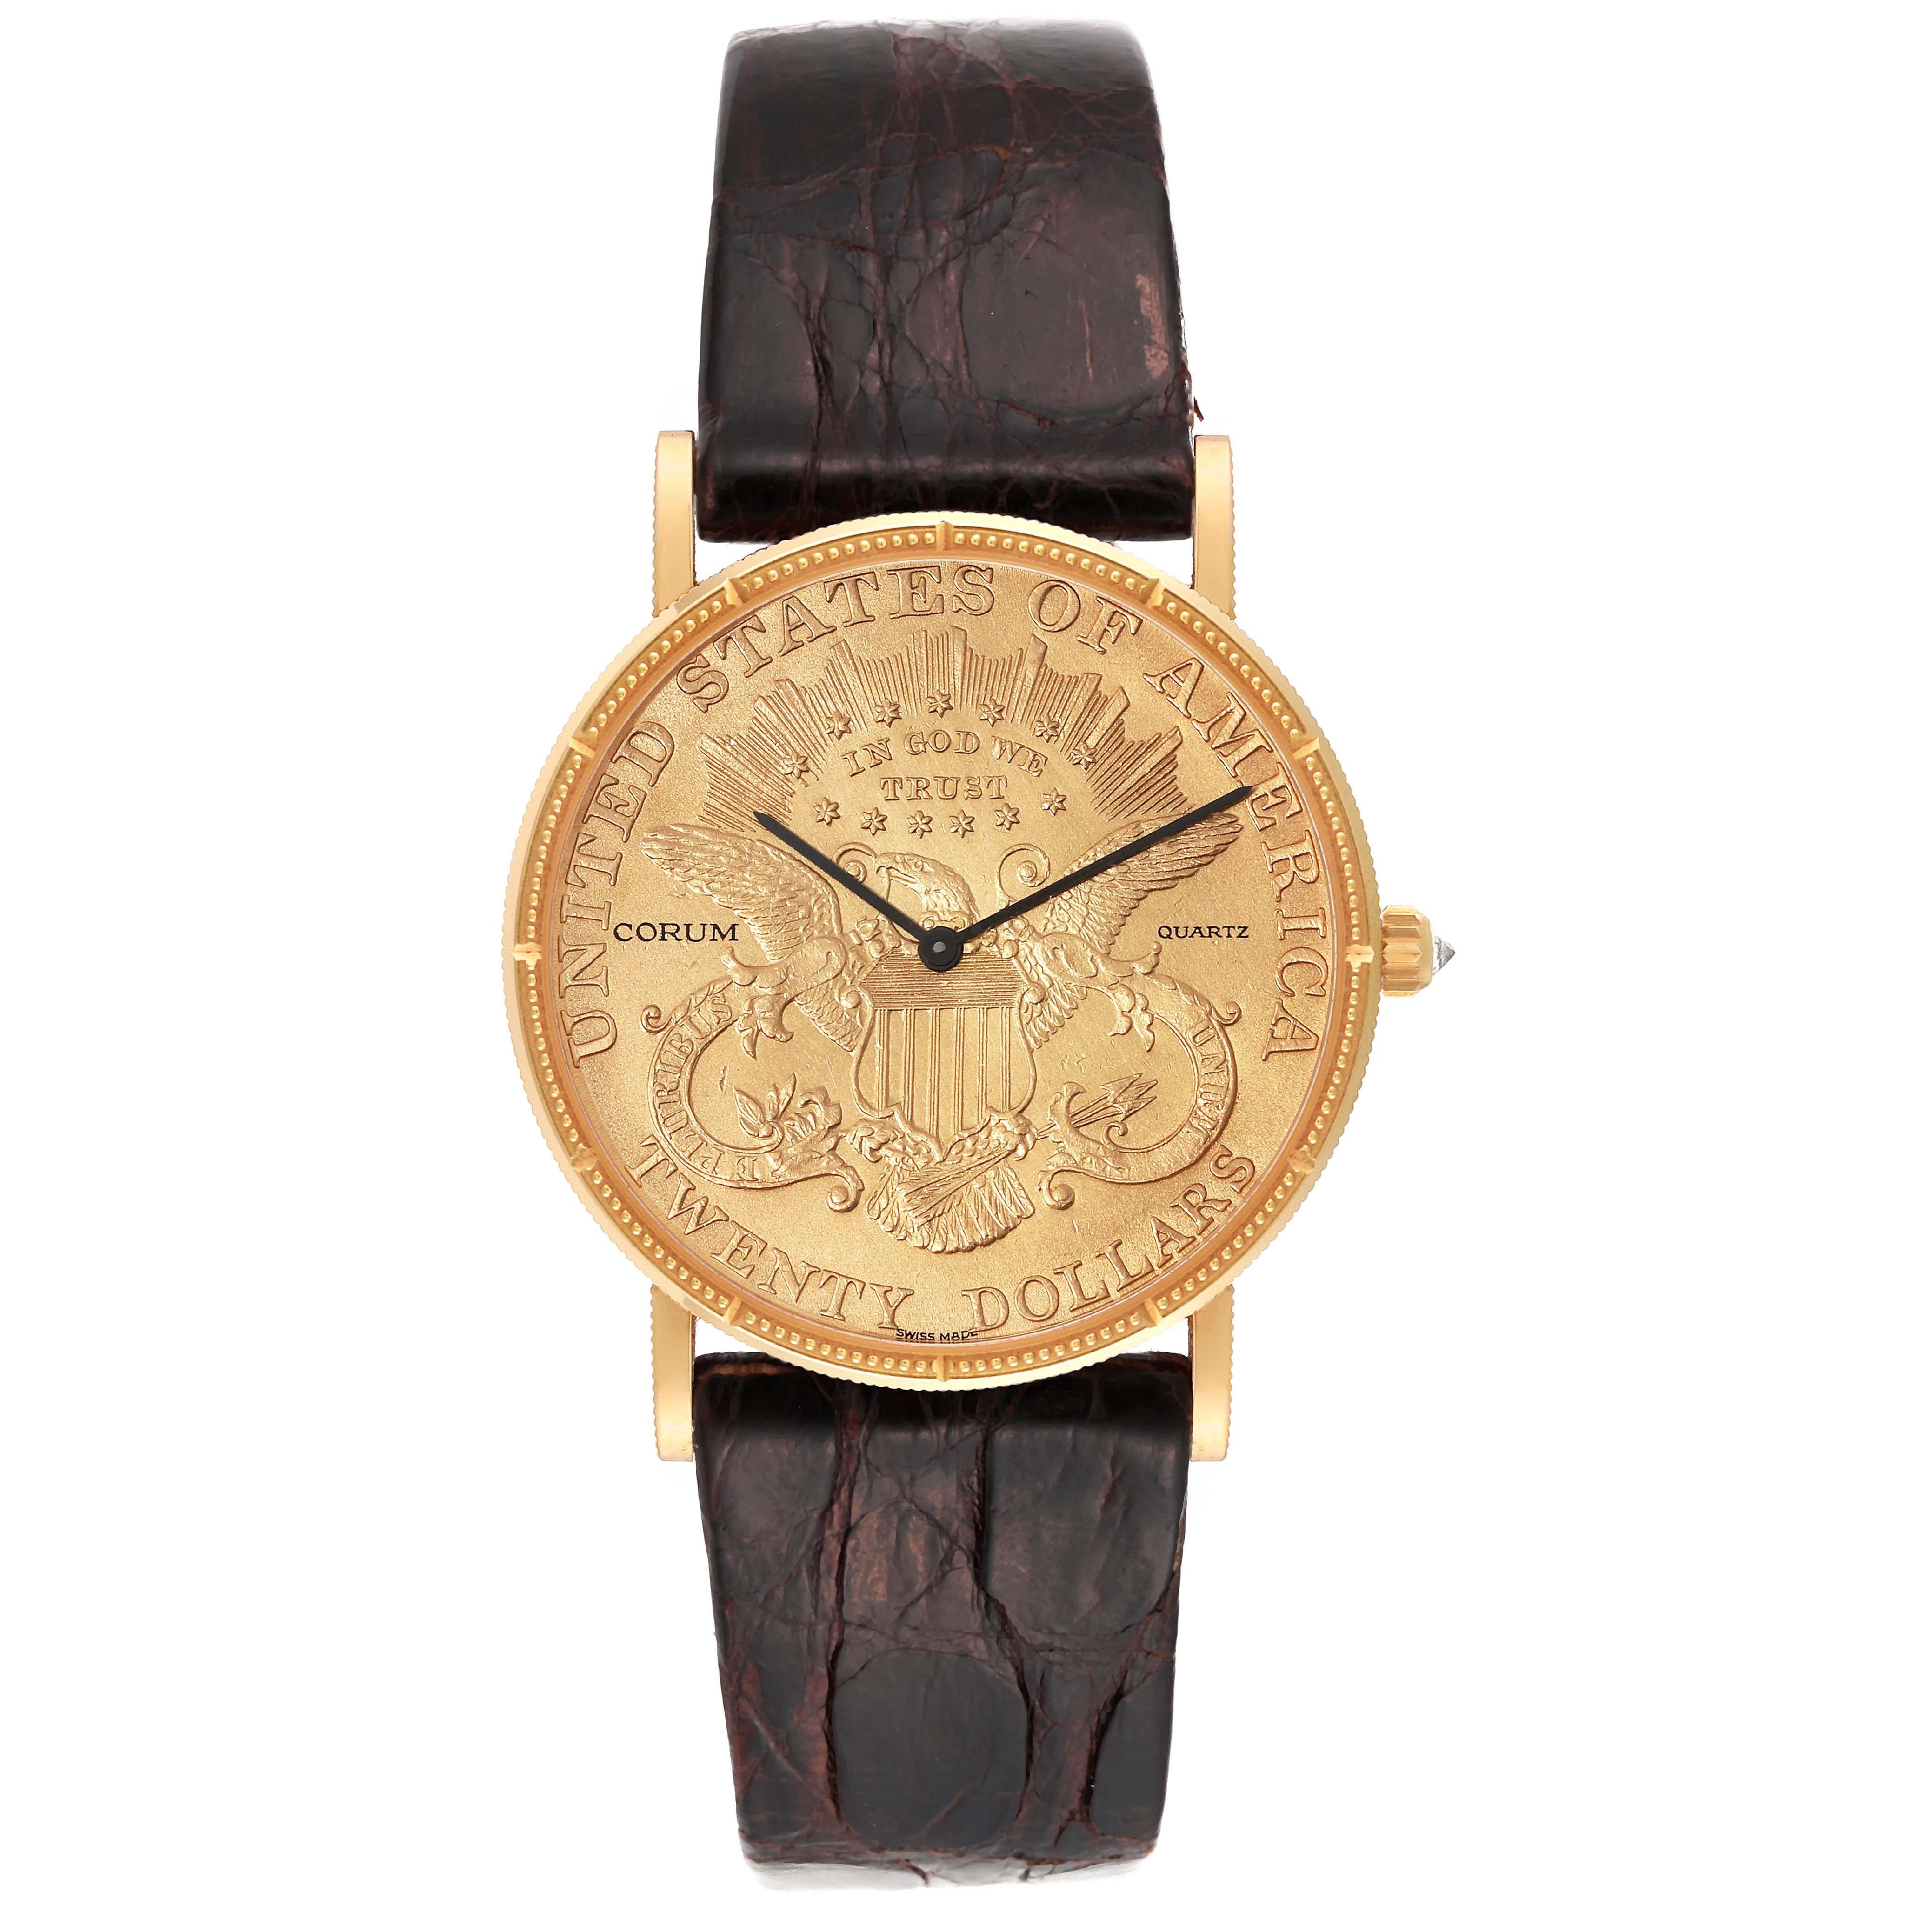 Corum Coin 20 Dollars Double Eagle Yellow Gold Mens Watch 4414556 Box Papers. Quartz movement. 18k yellow gold case with 22k coin 35.5 mm in diameter. Coin edge. . Mineral glass crystal. 22k coin with black baton hands. Brown leather strap with